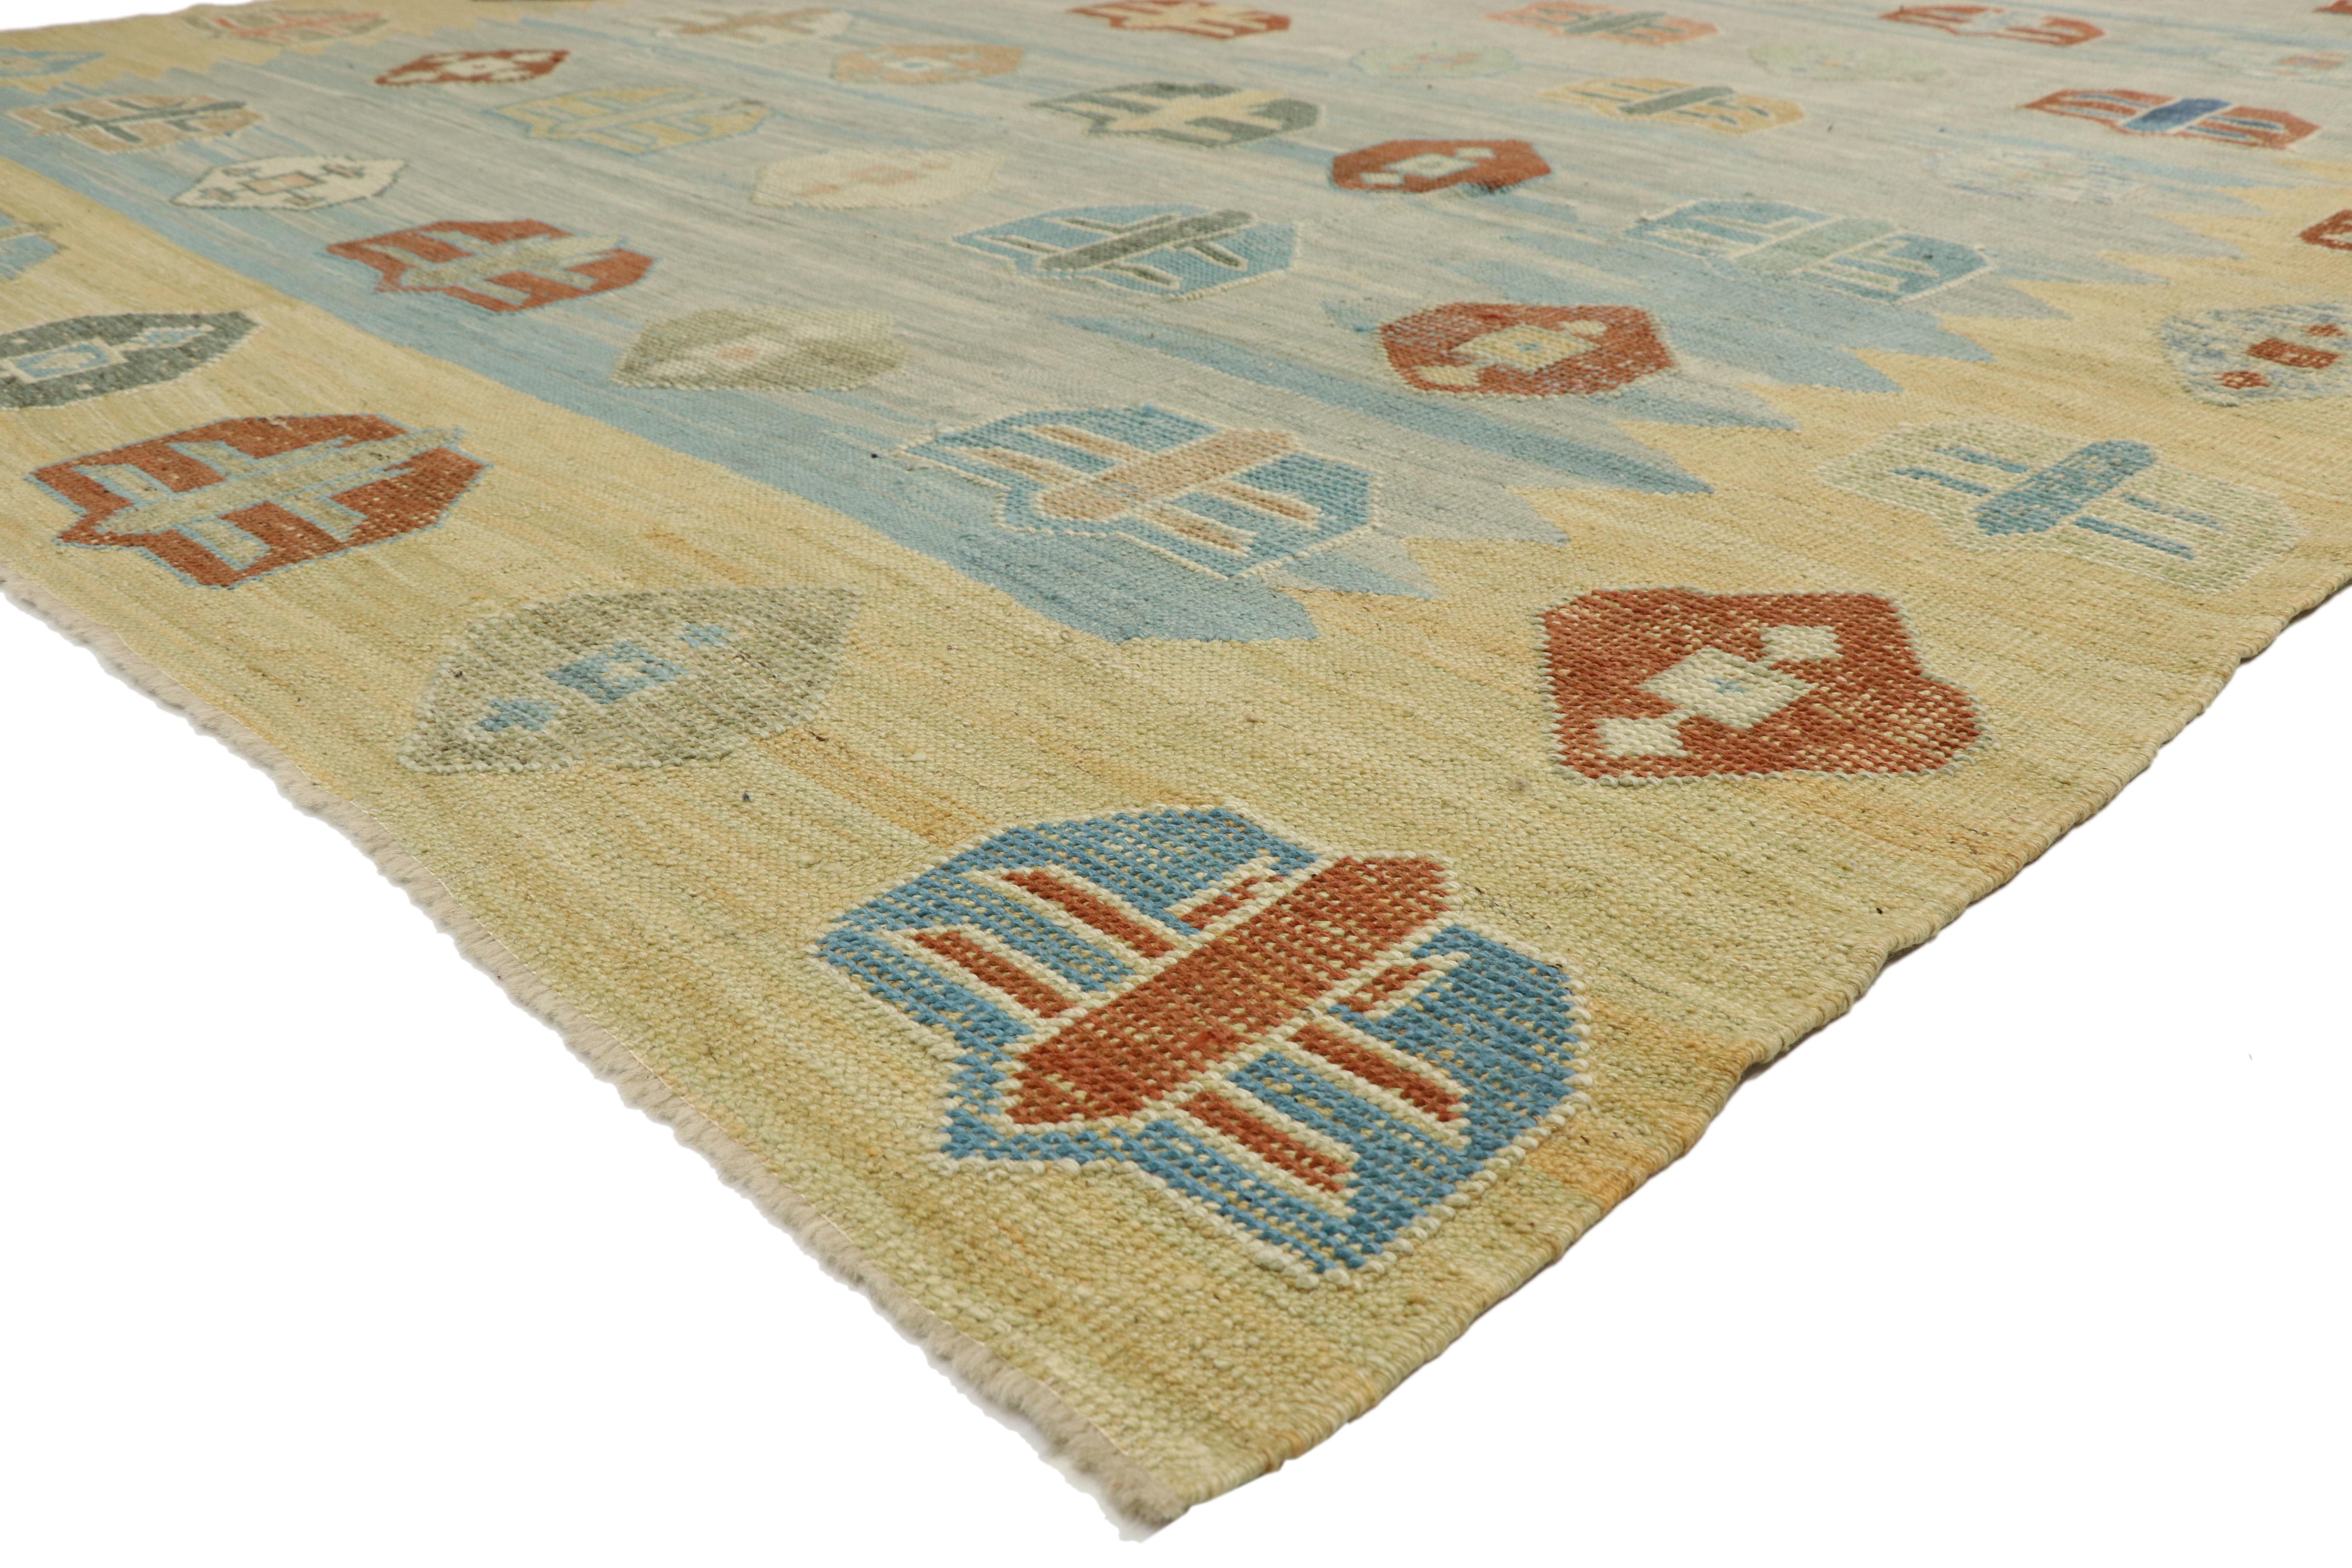 52209, new contemporary Turkish Kilim Souf rug with Tribal style, flat-weave area rug. The tribal style and rich waves of abrash in this hand-woven wool new contemporary Turkish kilim rug are a change of pace from the vibrant colors usually related